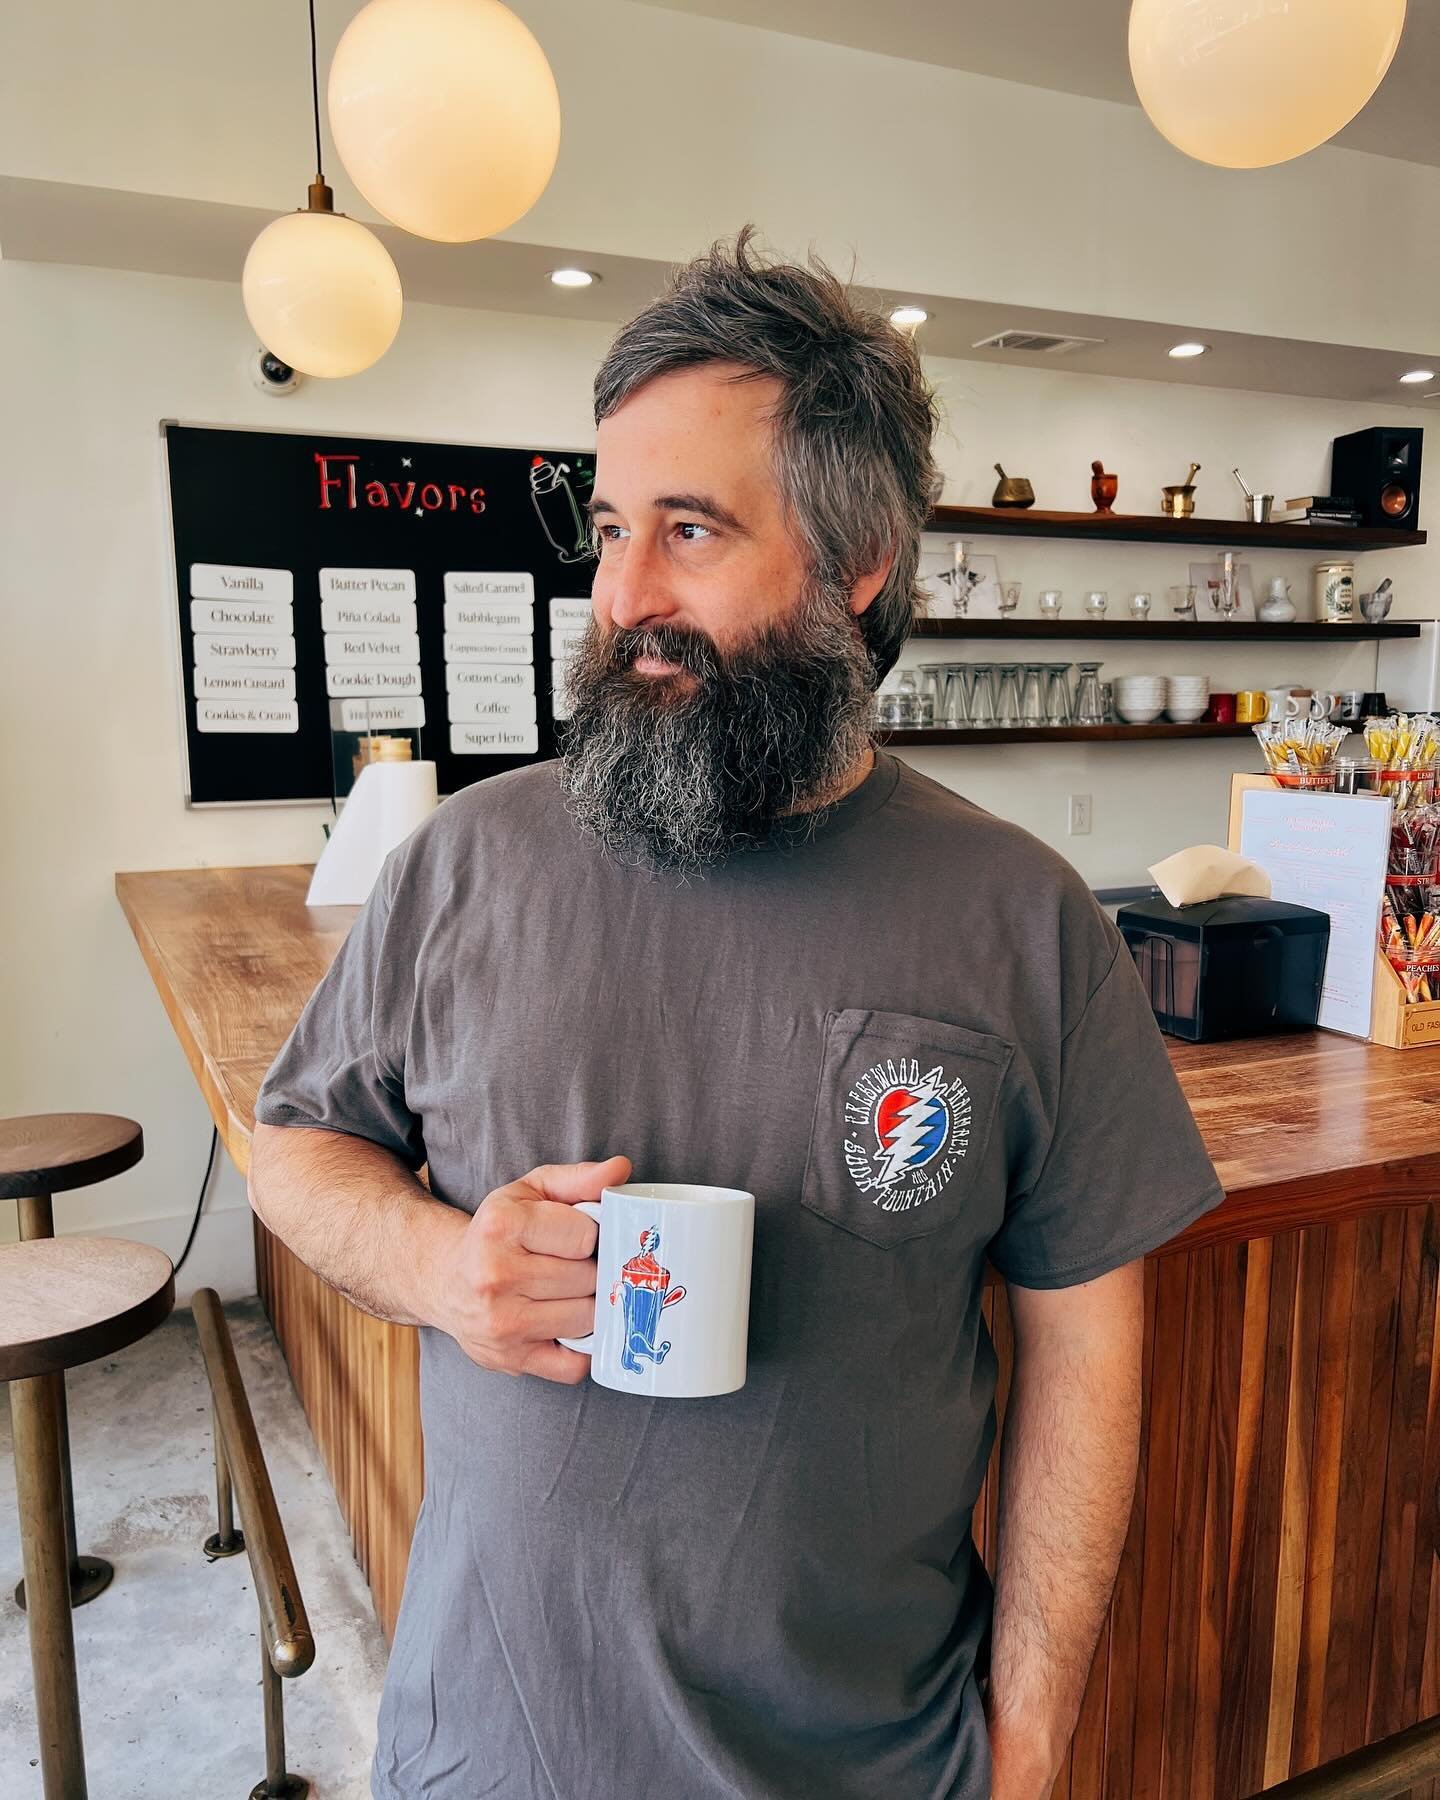 ‼️New Merch Alert‼️ We&rsquo;ve got some sweet new shirts and mugs in that are perfect for all of you dead heads out there 🔴🔵⚪️ They were designed by our talented soda jerk @jinx_and_powder (who is a freelance graphic designer here in bham if you&r